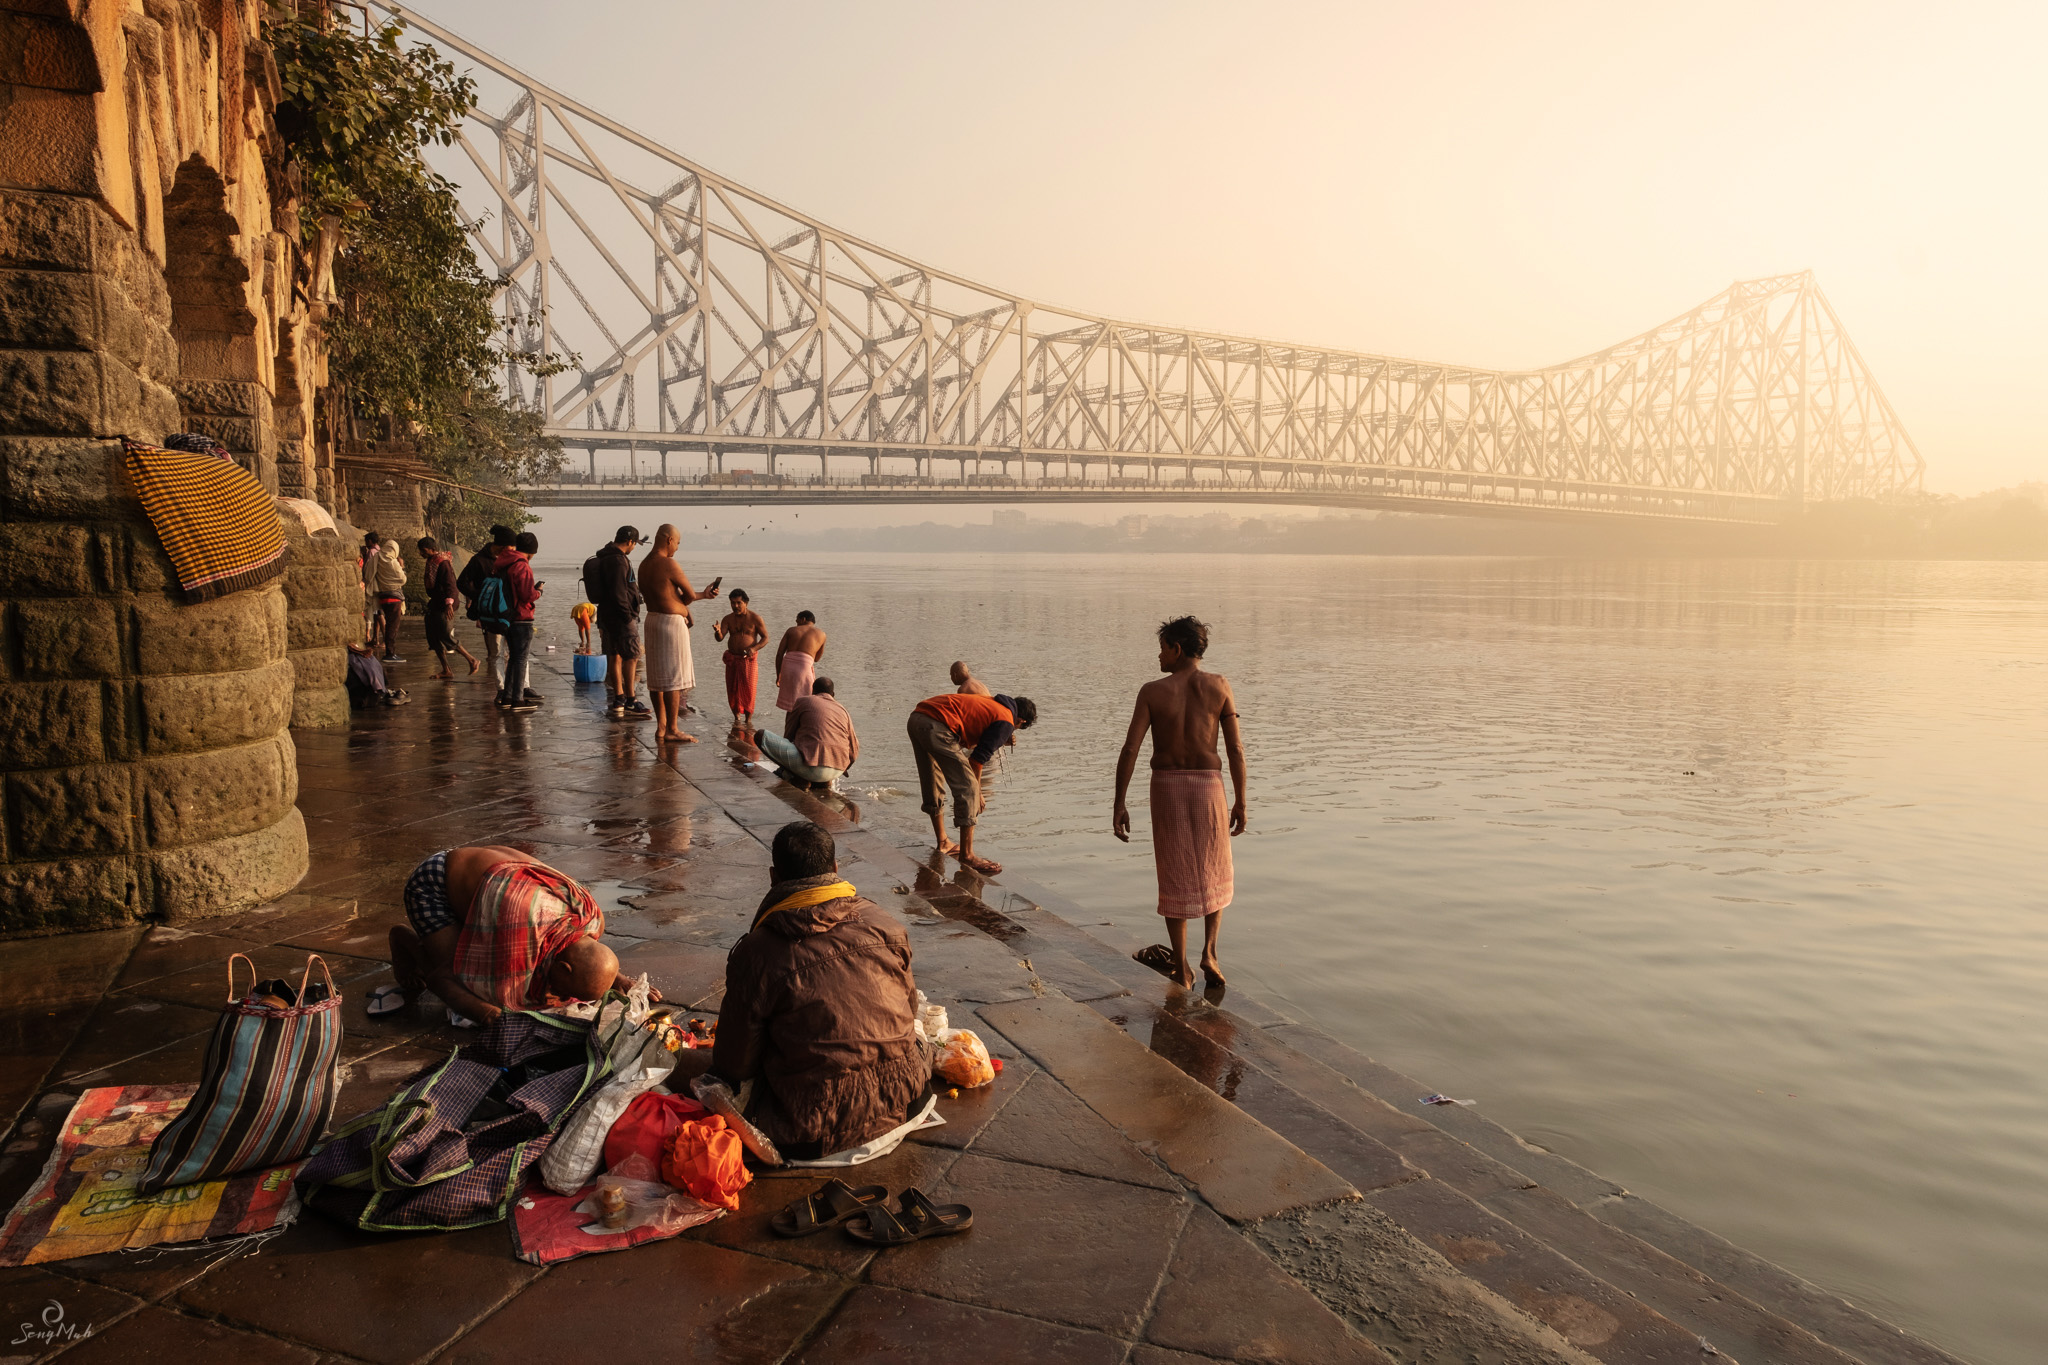 A view of the ghats at sunrise